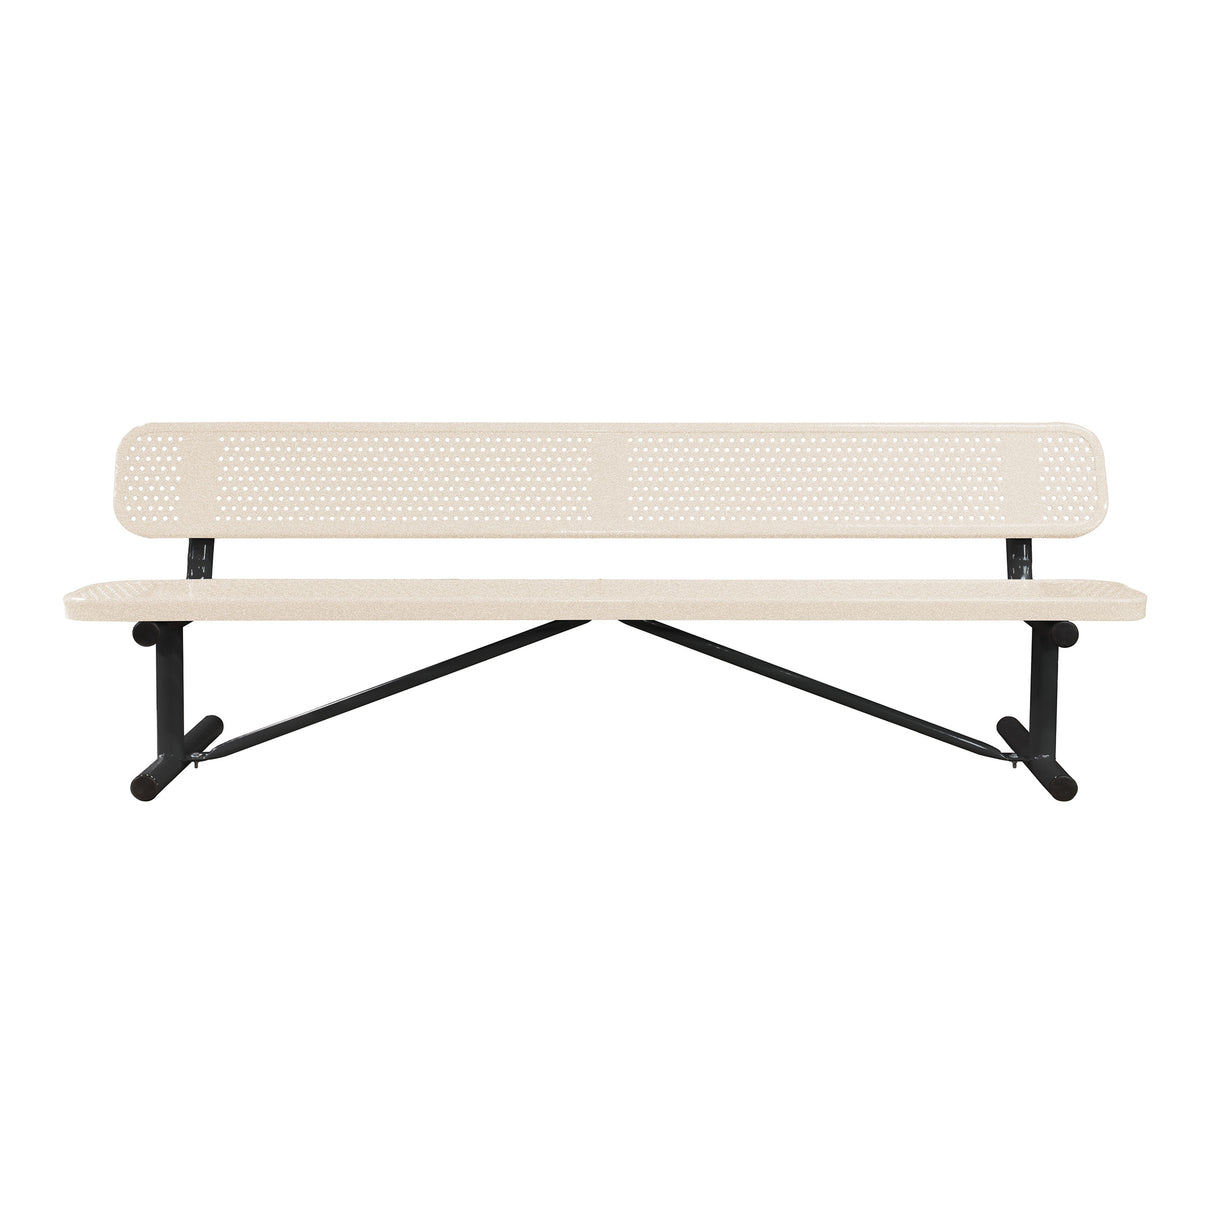 Standard Perforated Bench With Back